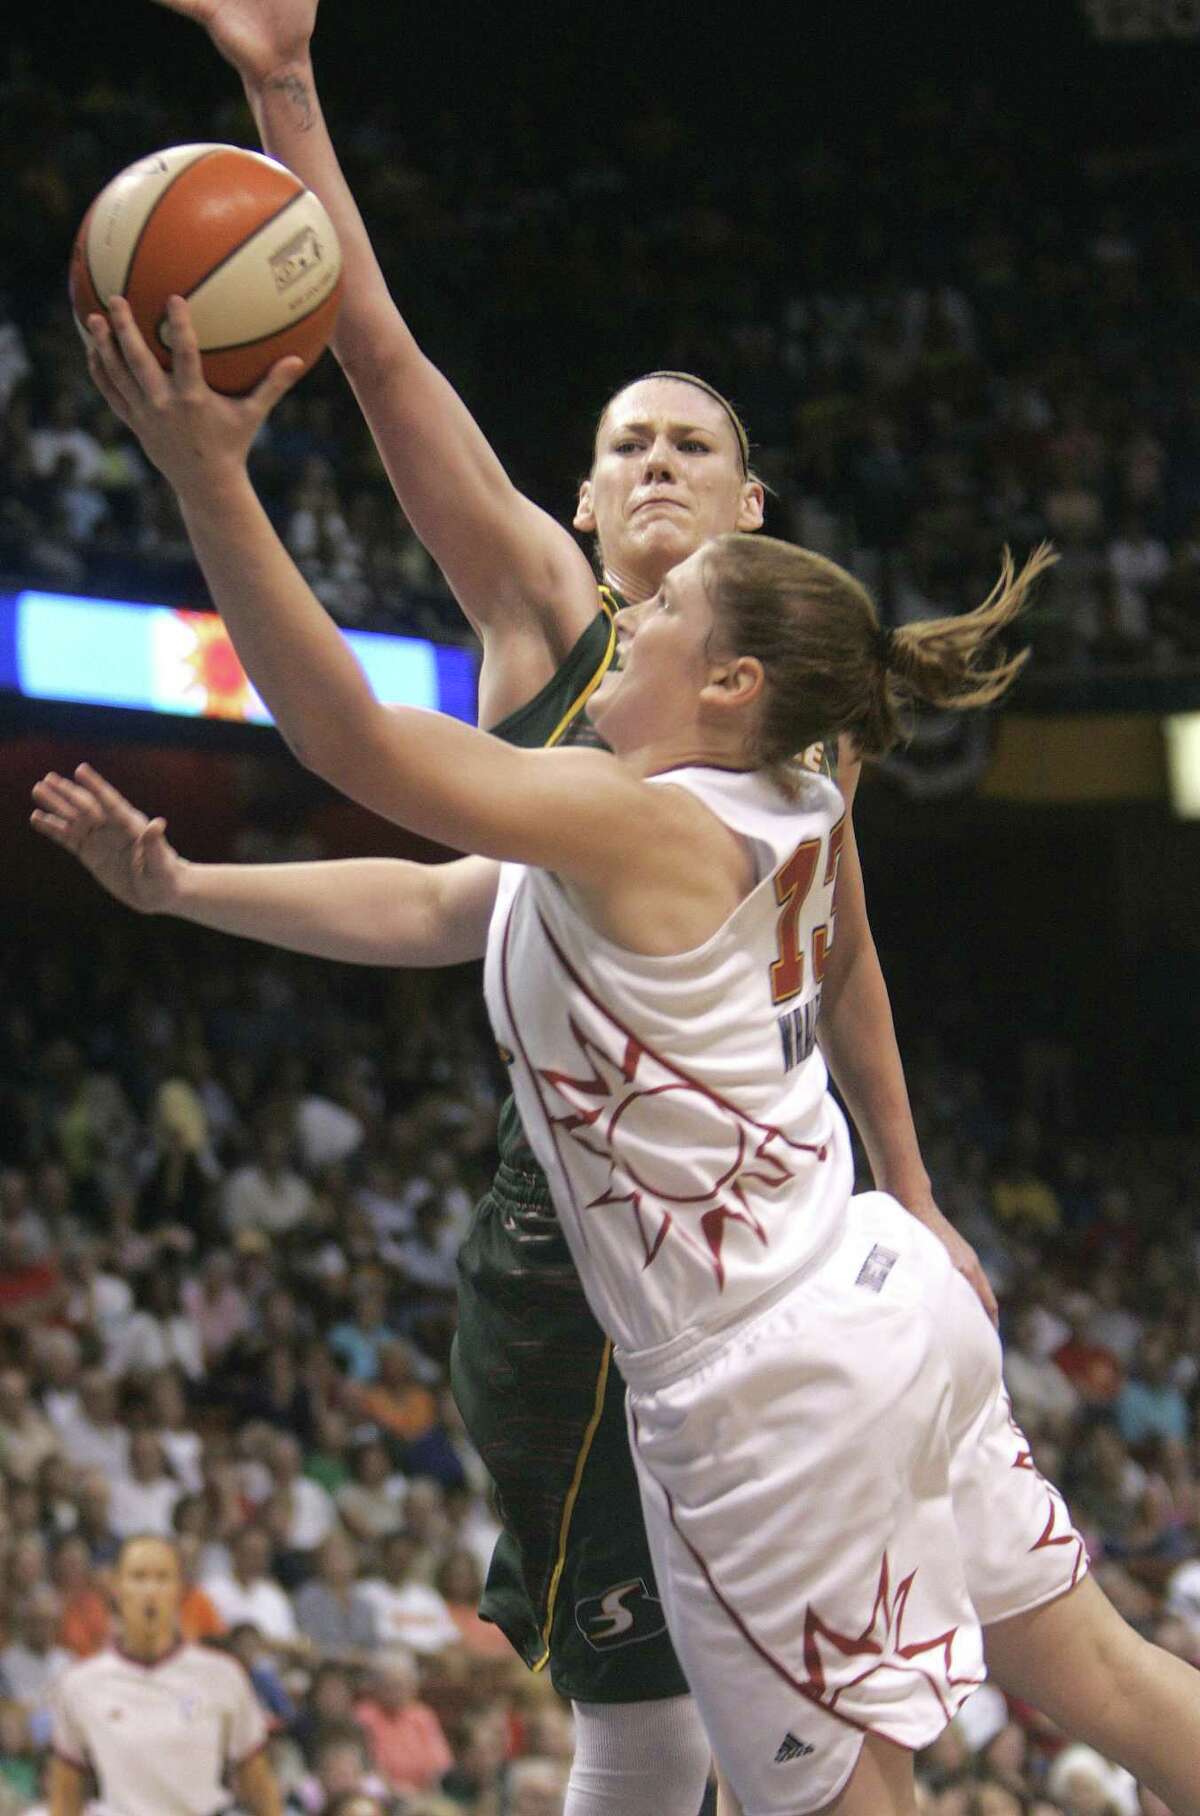 Former Connecticut Sun guard Lindsay Whalen, who is retiring at the end of this season, won six playoff series in her six seasons with the Sun.